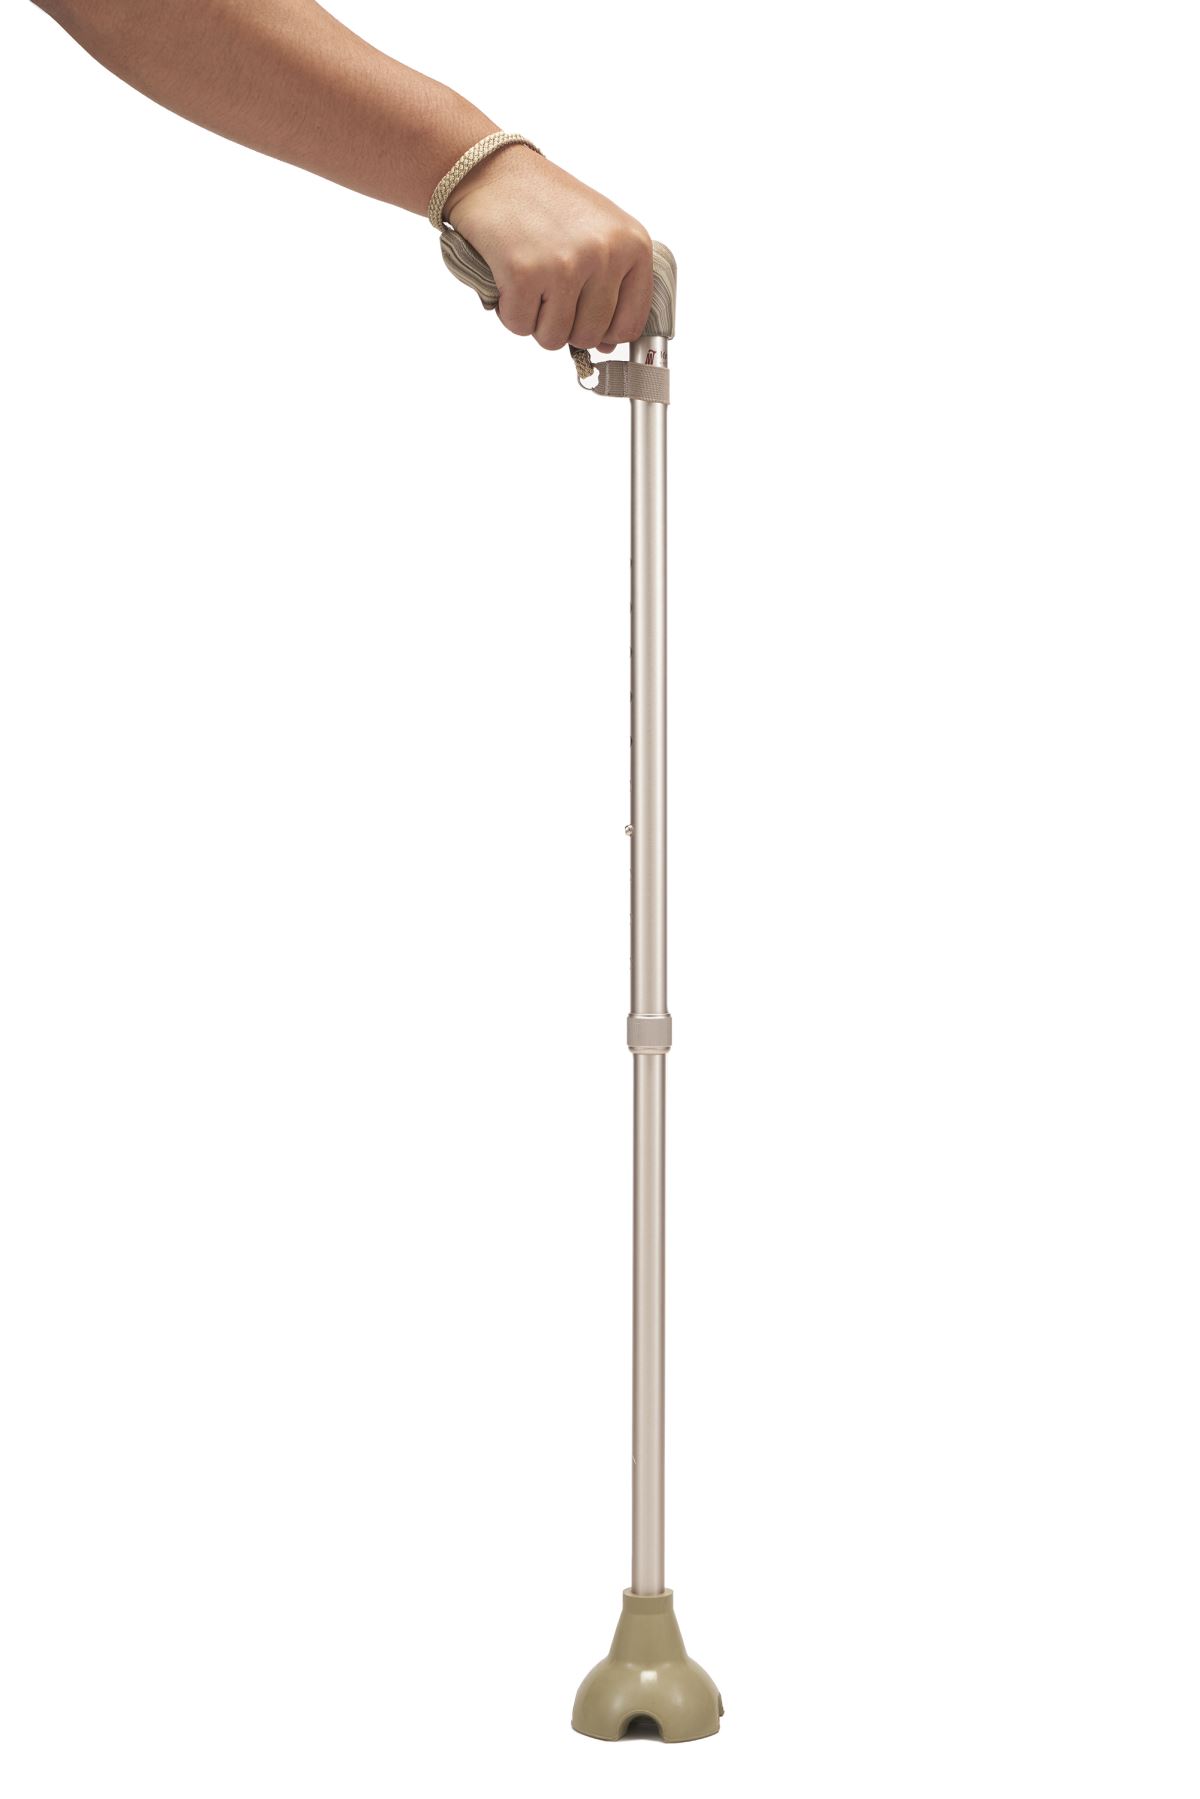 The cane stands on its own with the elastic quad base